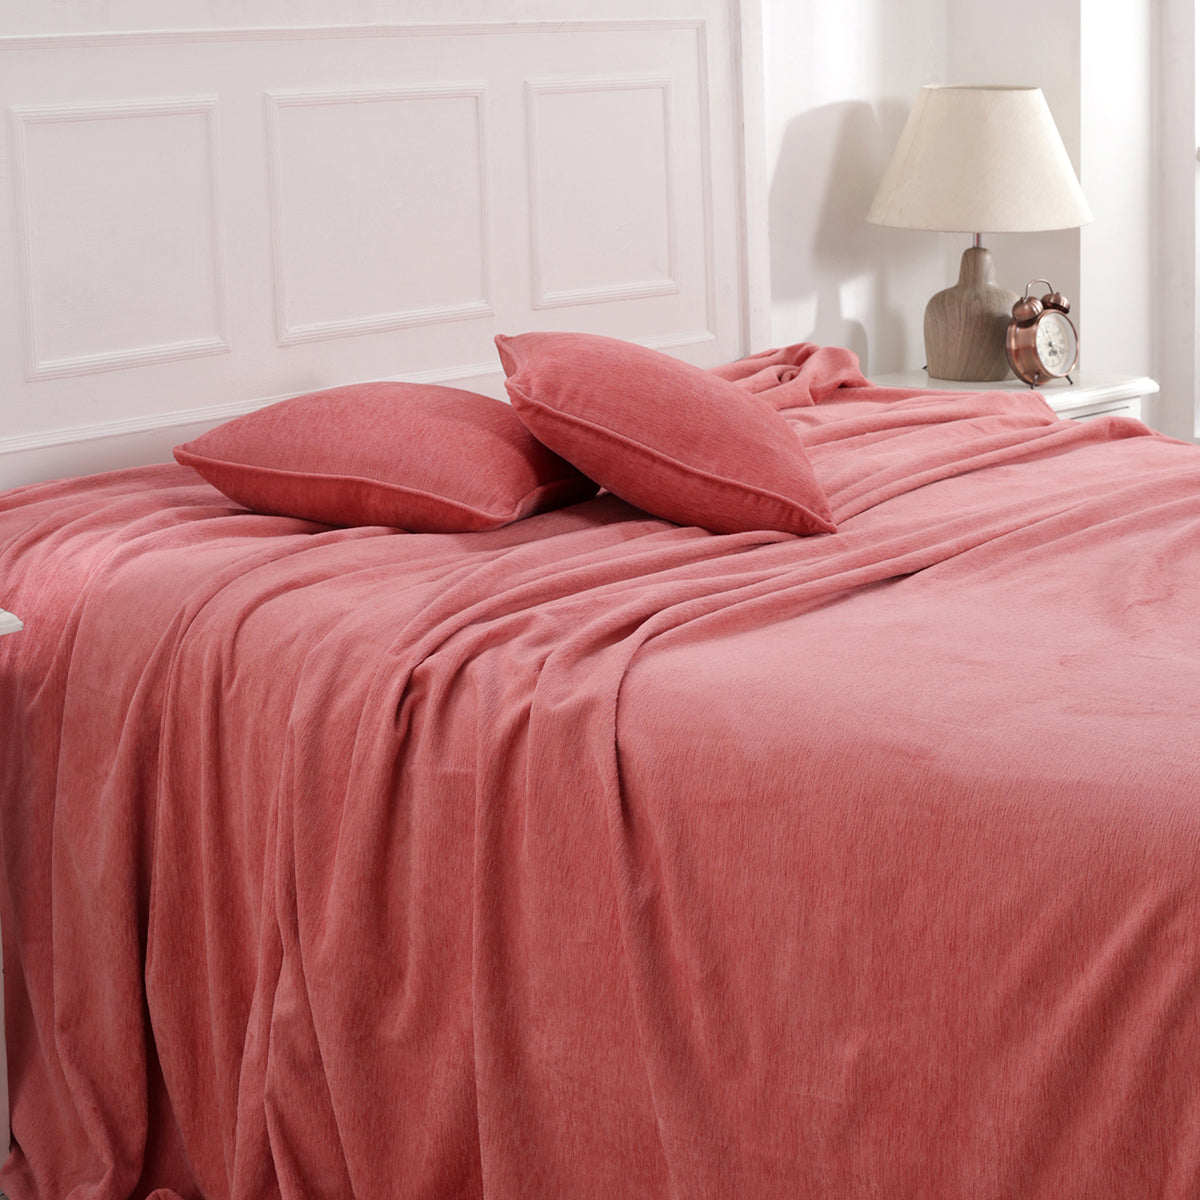 Jessica 100% Cotton Solid Woven Super Soft Spiced Coral Bed Cover/Blanket